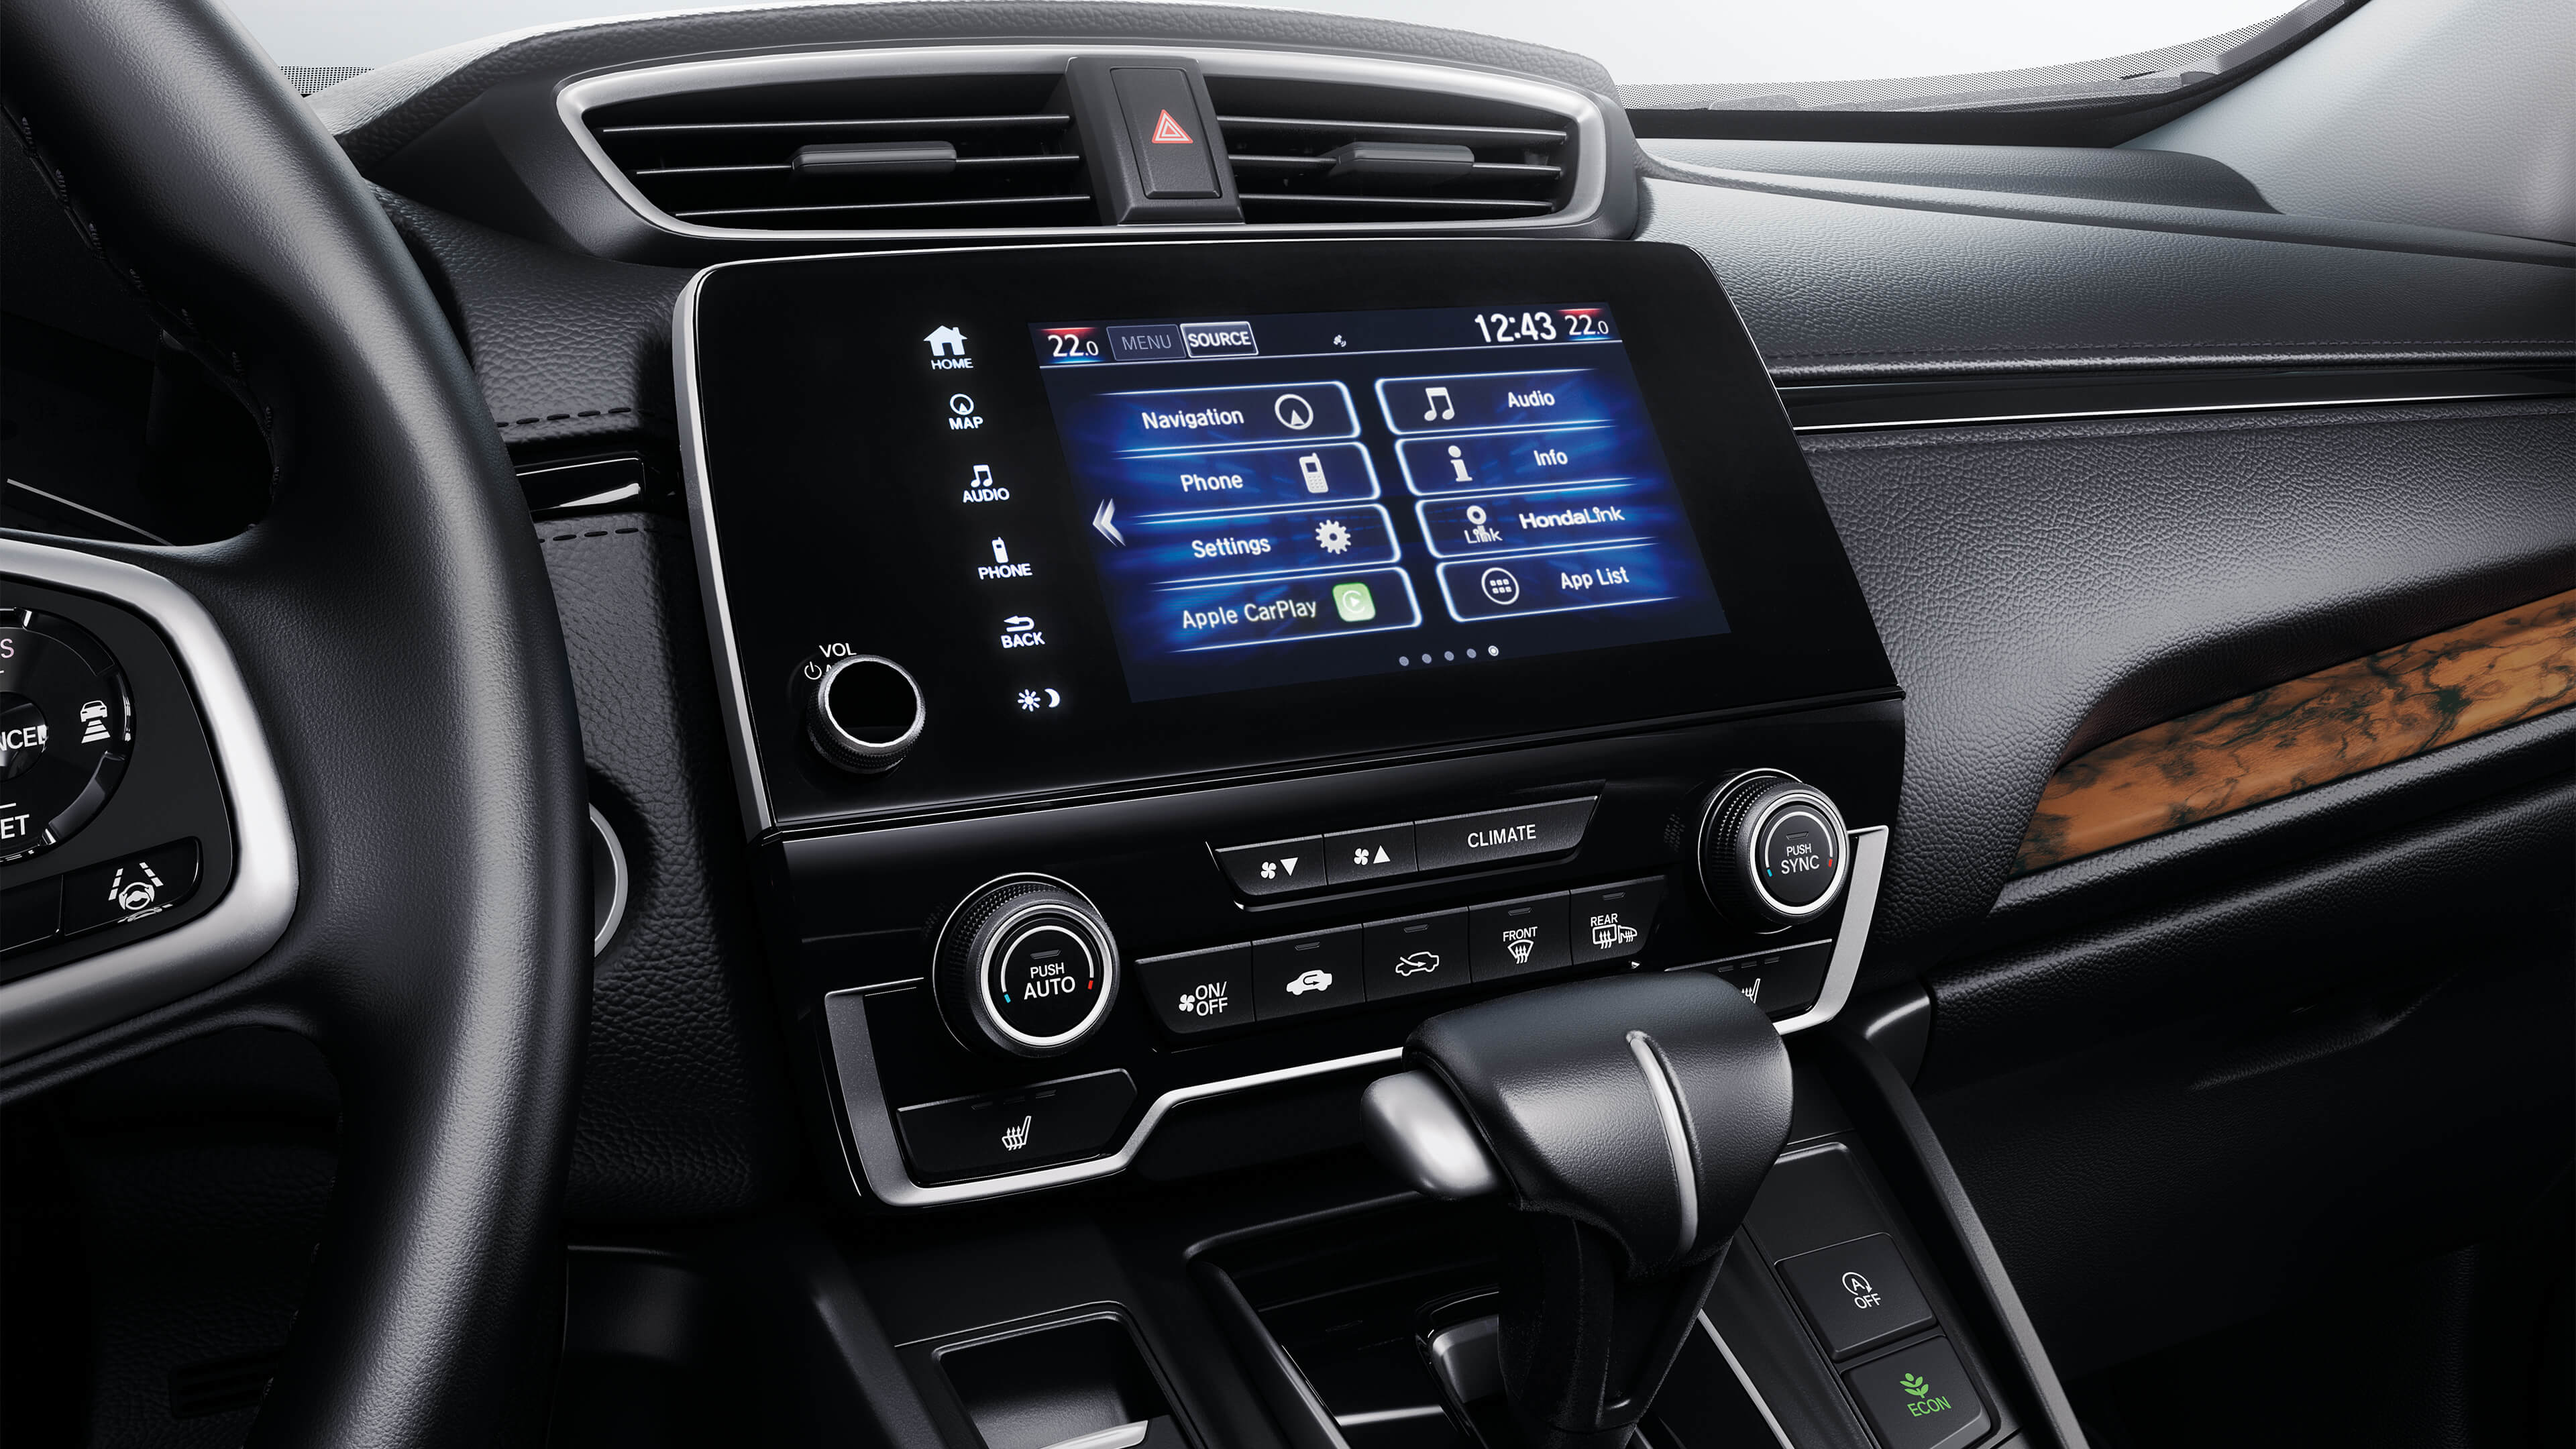 7-inch Display Audio touch-screen detail in the 2021 Honda CR-V.